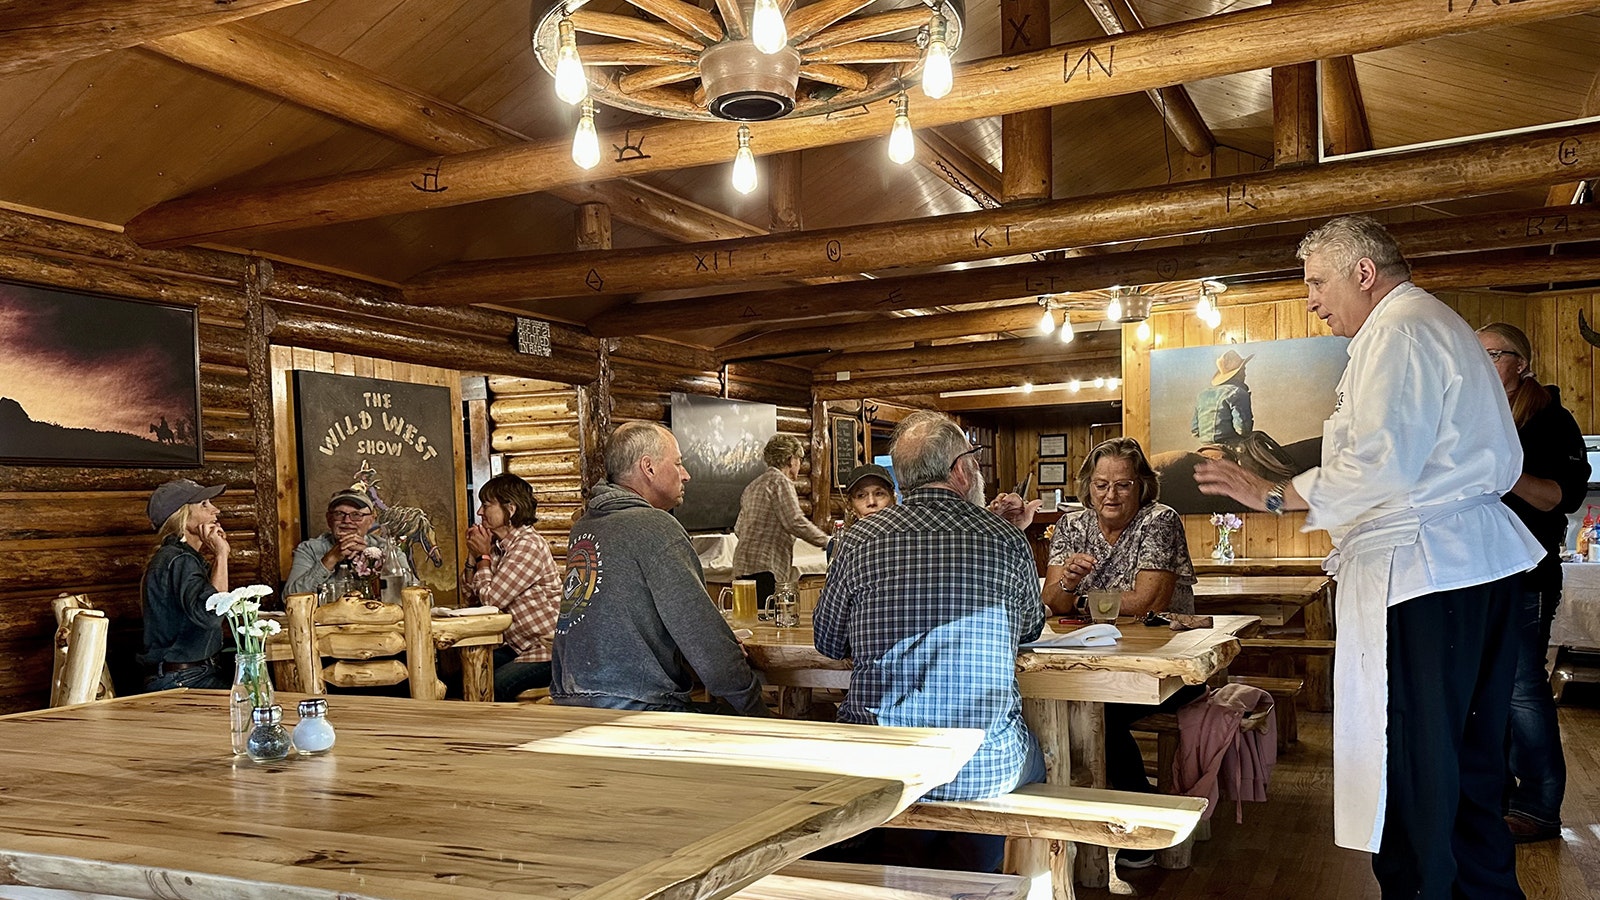 The dining room at the UXU Ranch. Since Vince Fiore started cooking this summer, the tables have been consistently full of locals, many coming multiple times a week. Seafood and Italian food have been the biggest successes of the summer.